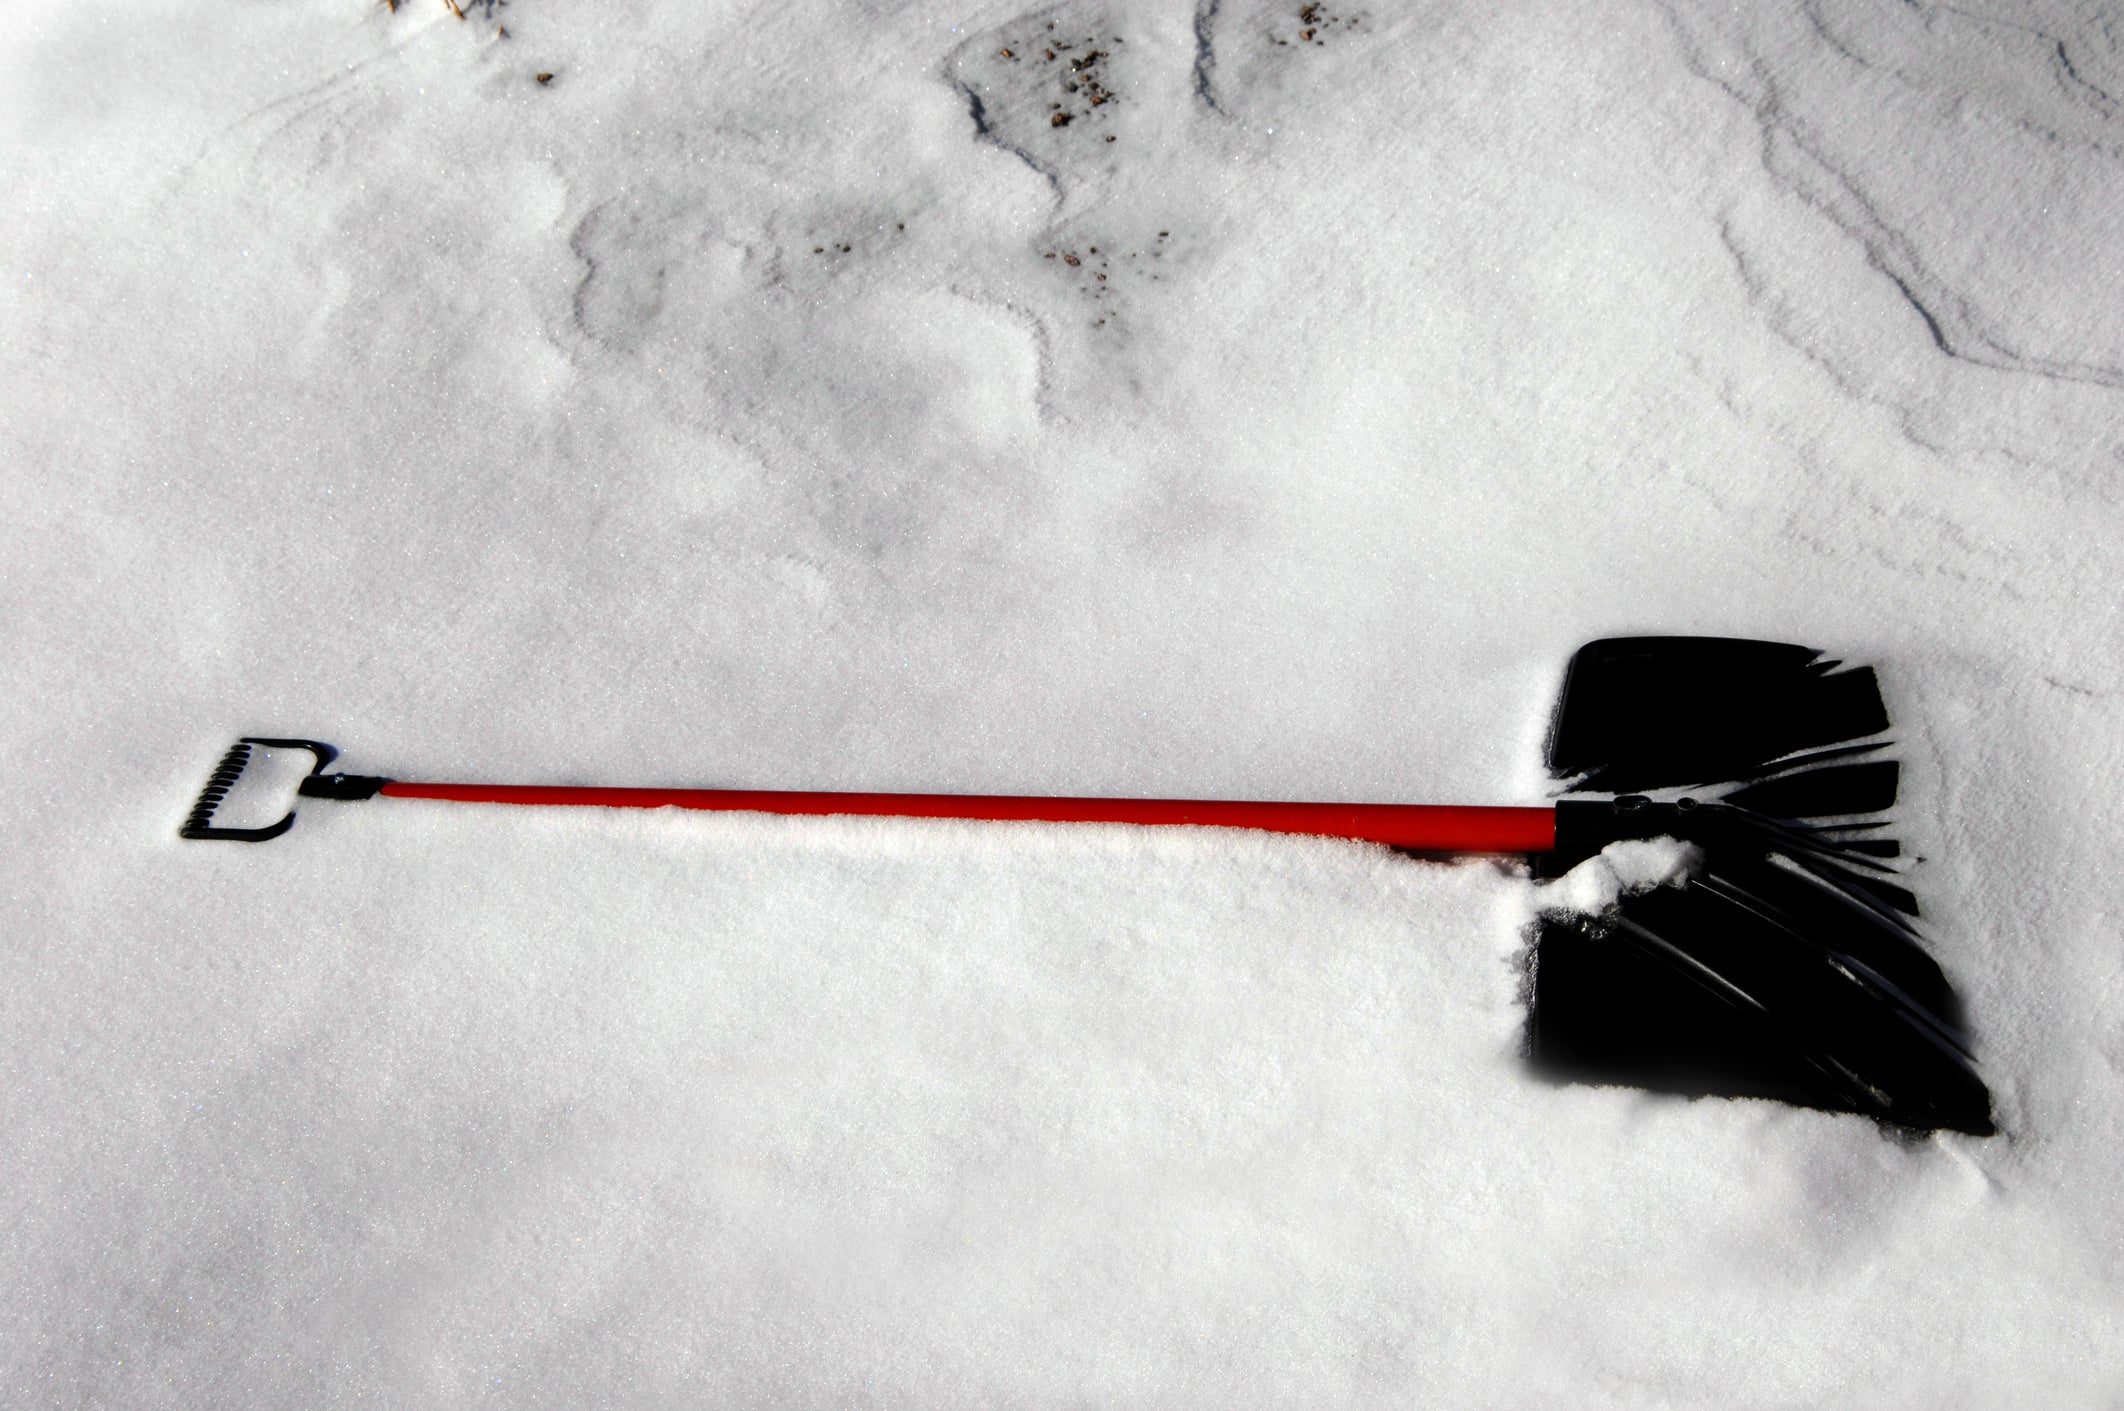 How to Remove Snow Without a Shovel: Innovative and Effective Methods